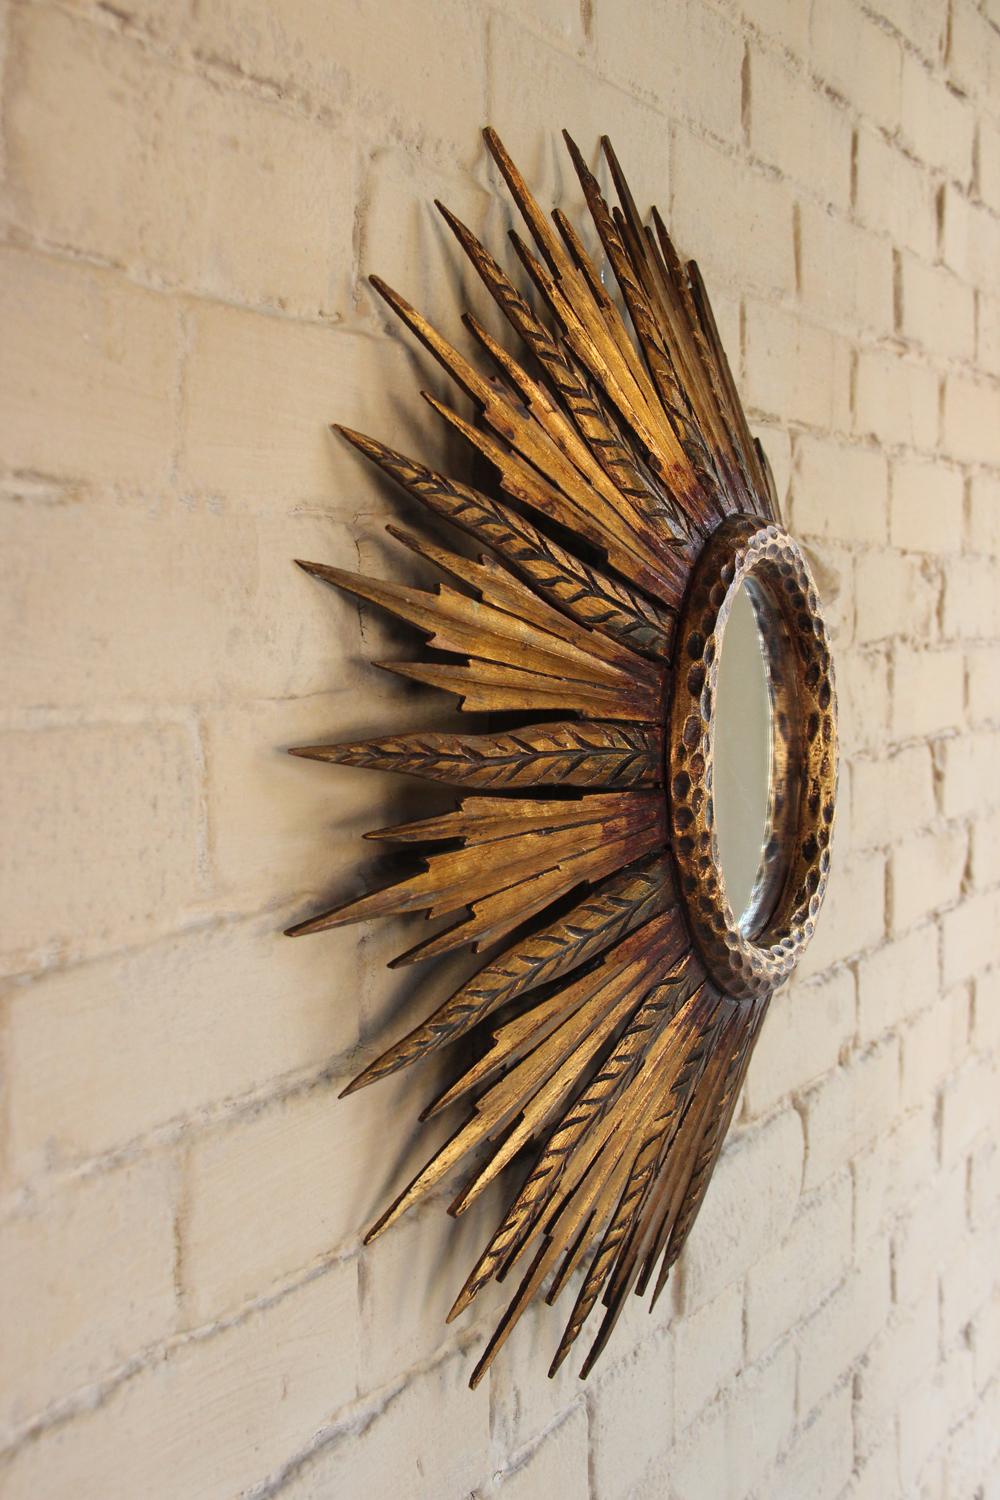 A midcentury French sunburst mirror, circa 1930 with feathered rays. Original mirror plate. The mirror is 6.5 inches in diameter.